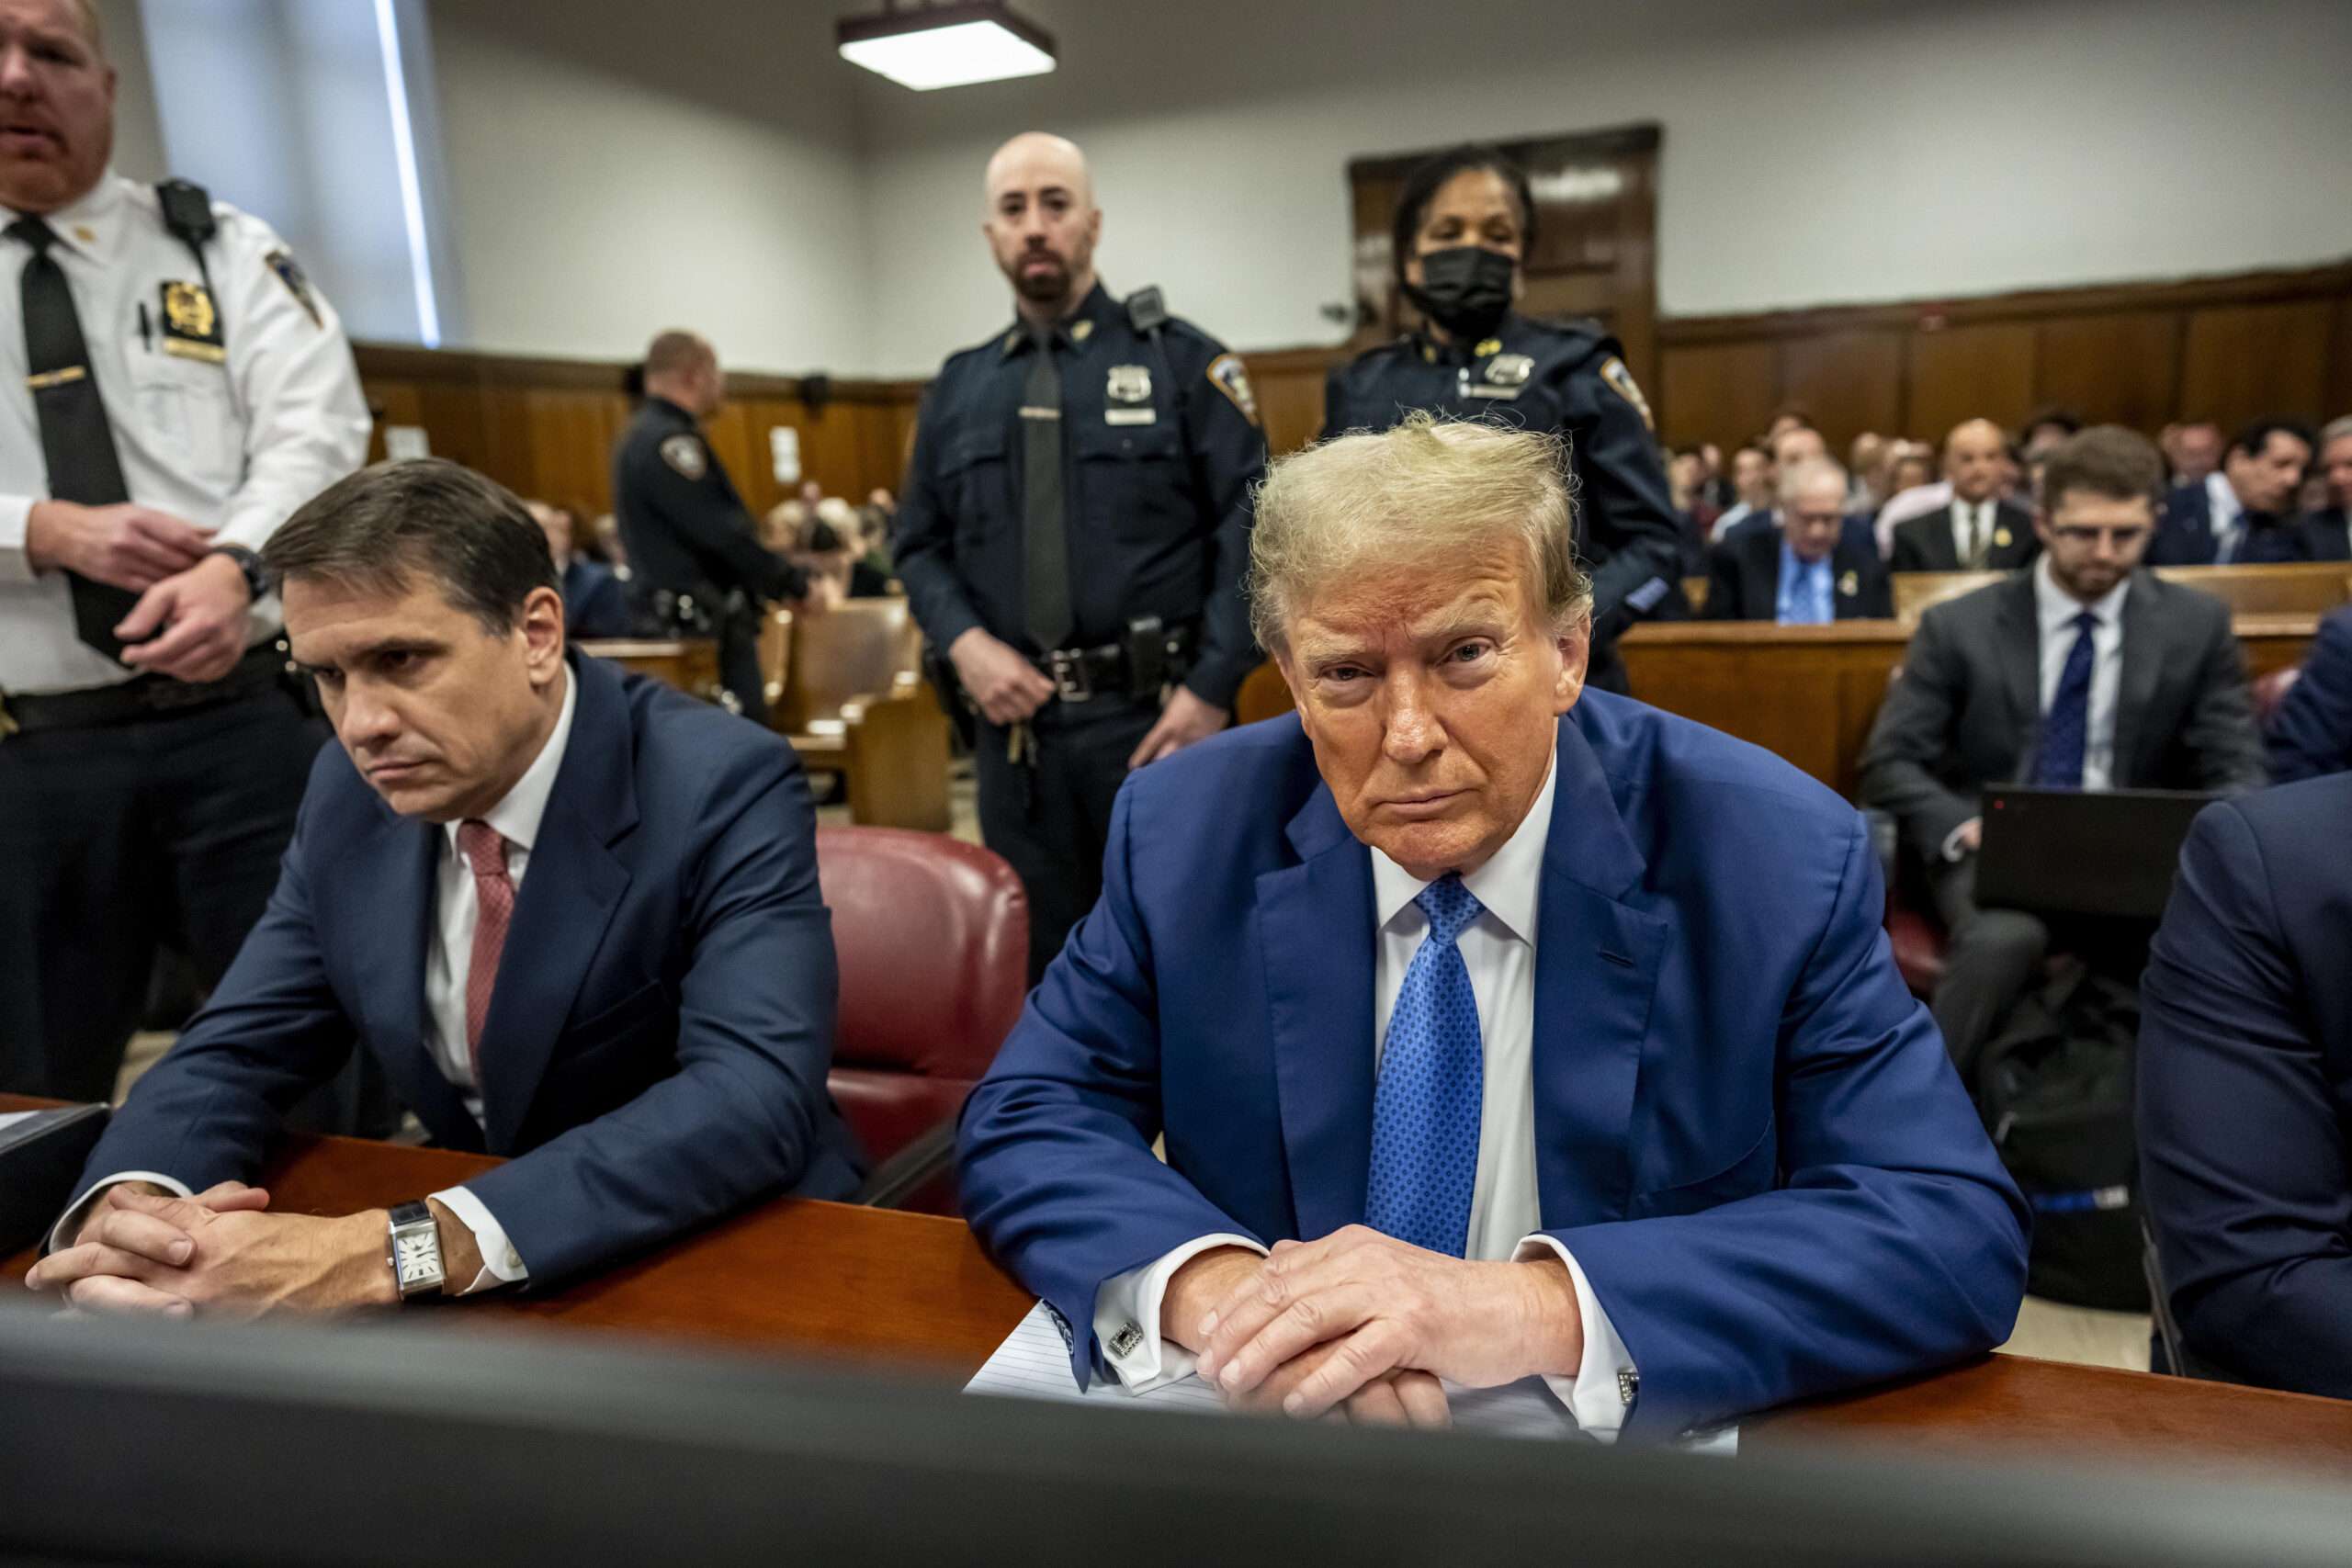 A jumble of legal theories failed to give Trump 'fair notice' of the New York charges against him